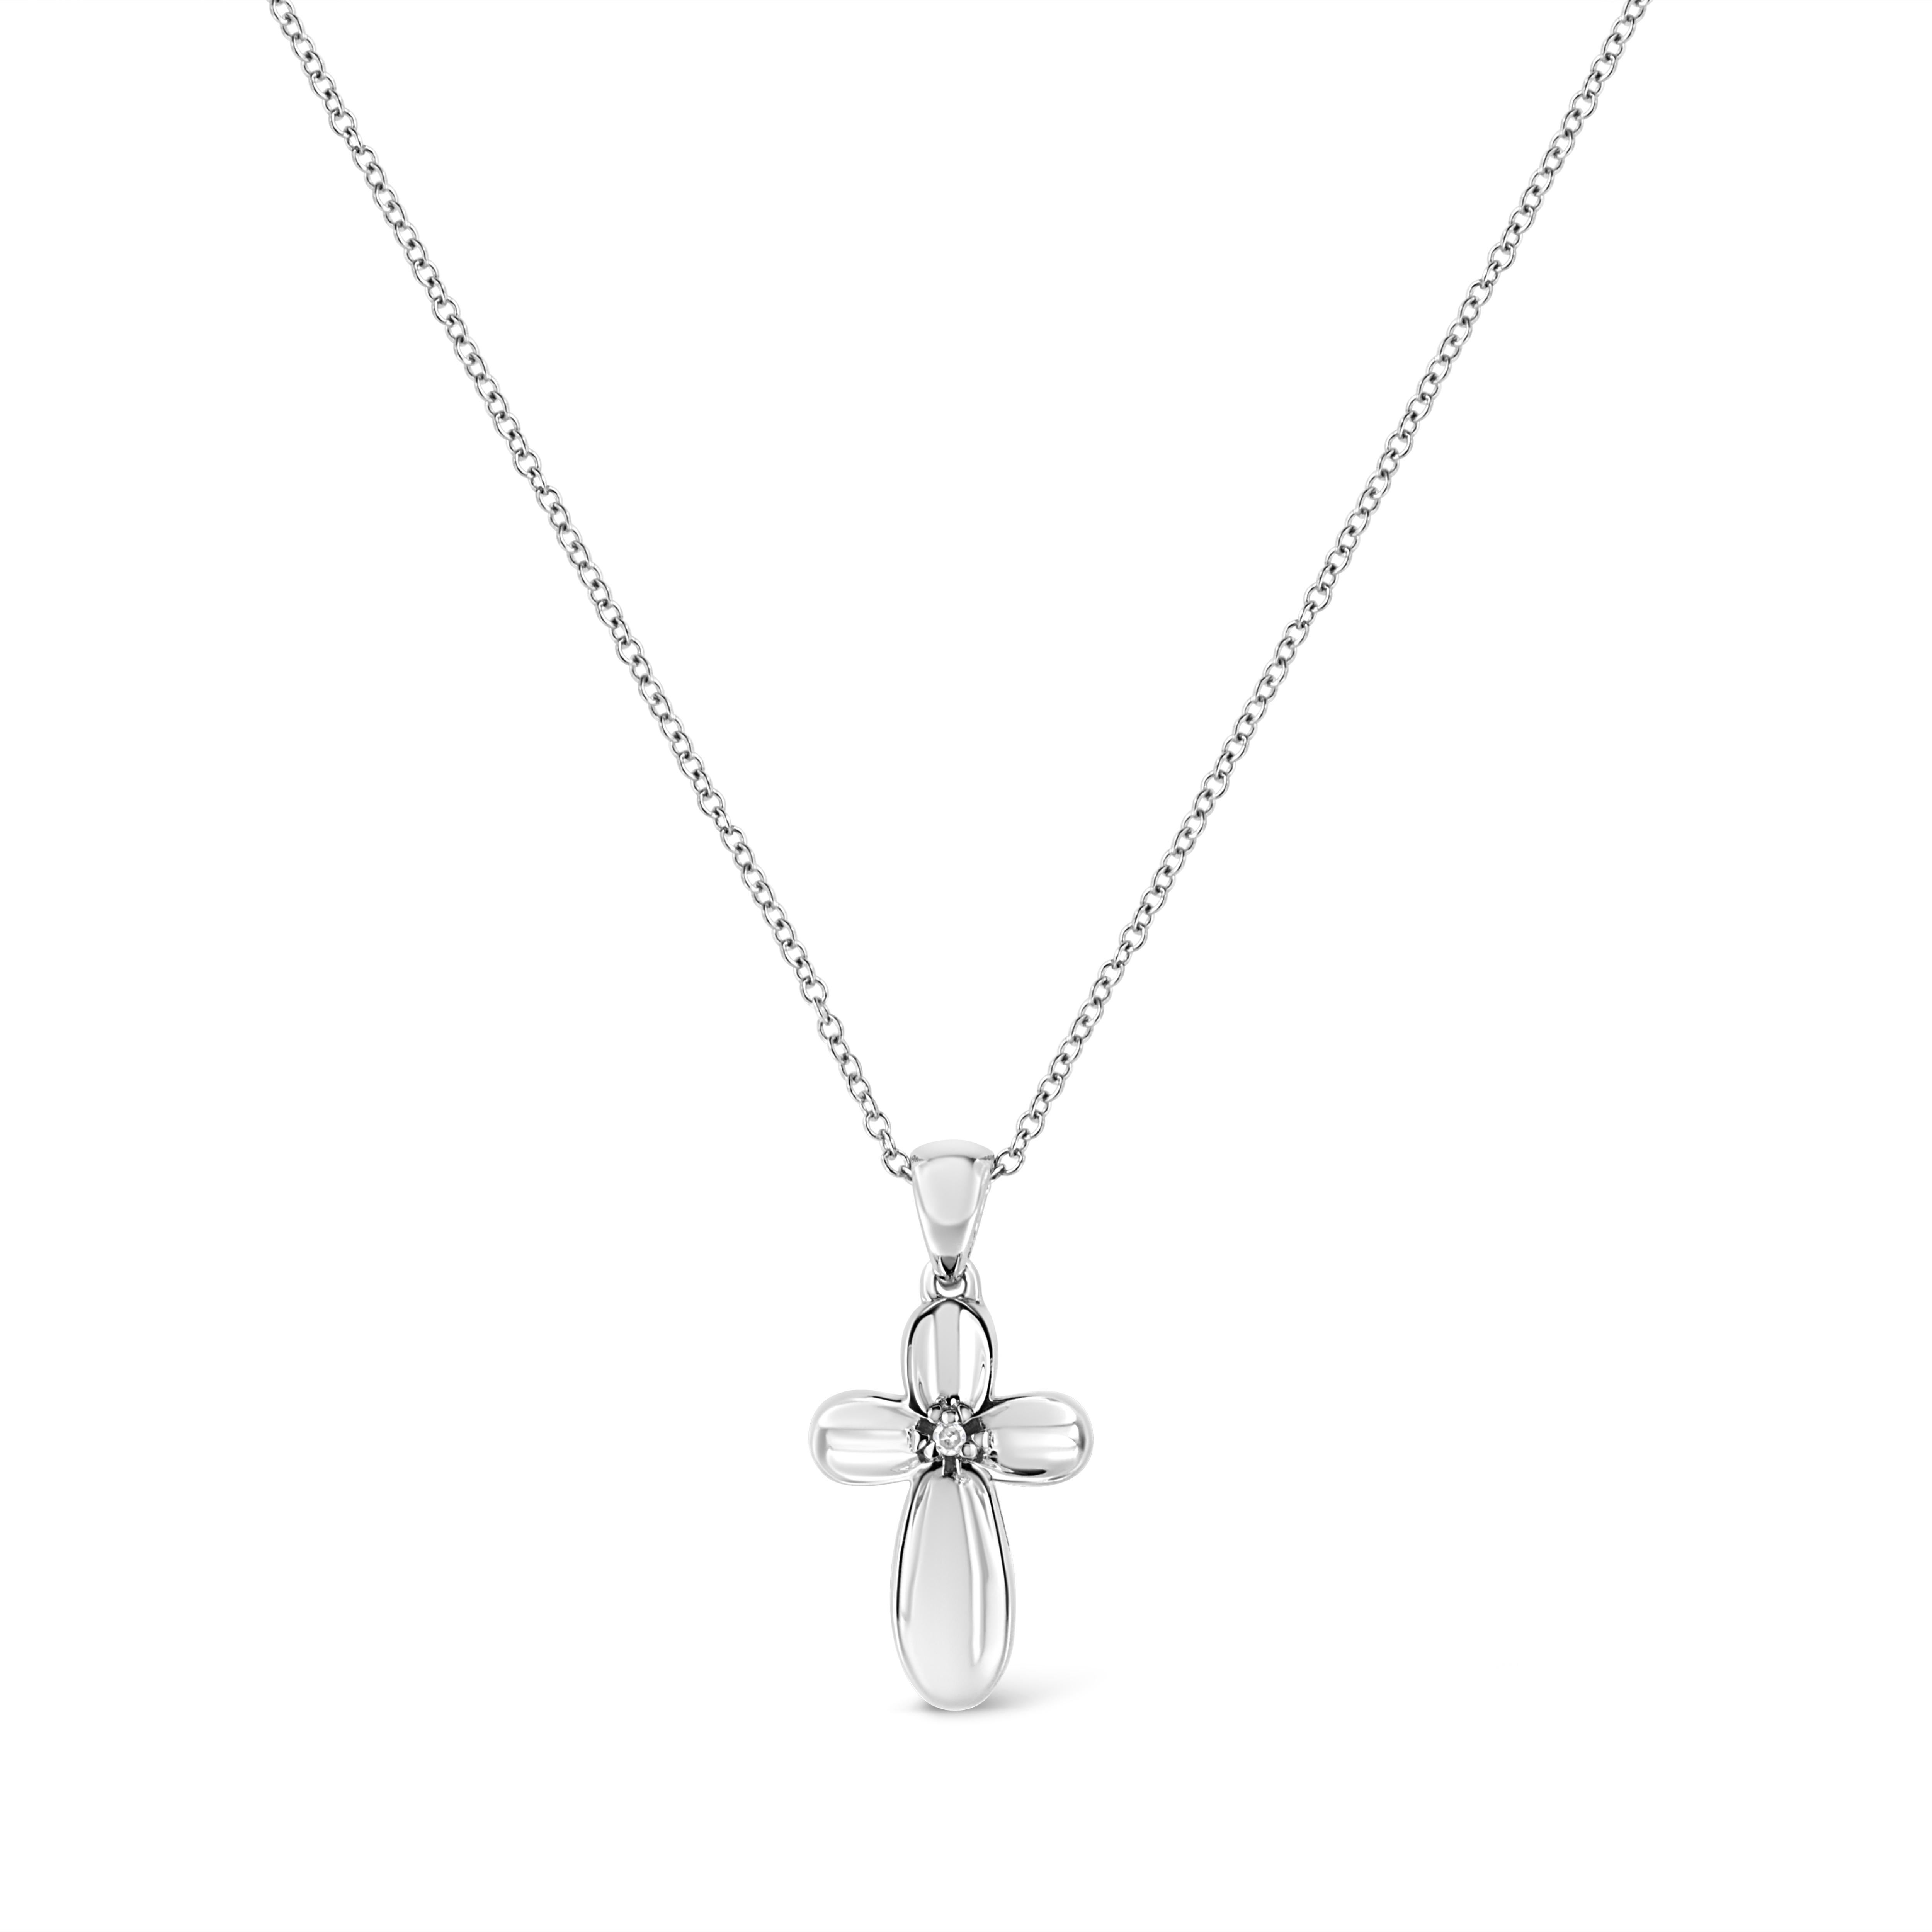 This classic diamond cross pendant is a beautiful symbol of divine faith. Fashioned in sterling silver, this ravishing pendant is embellished with a radiant prong set single cut diamond and hangs up from a beautiful cable chain. Total diamond weight